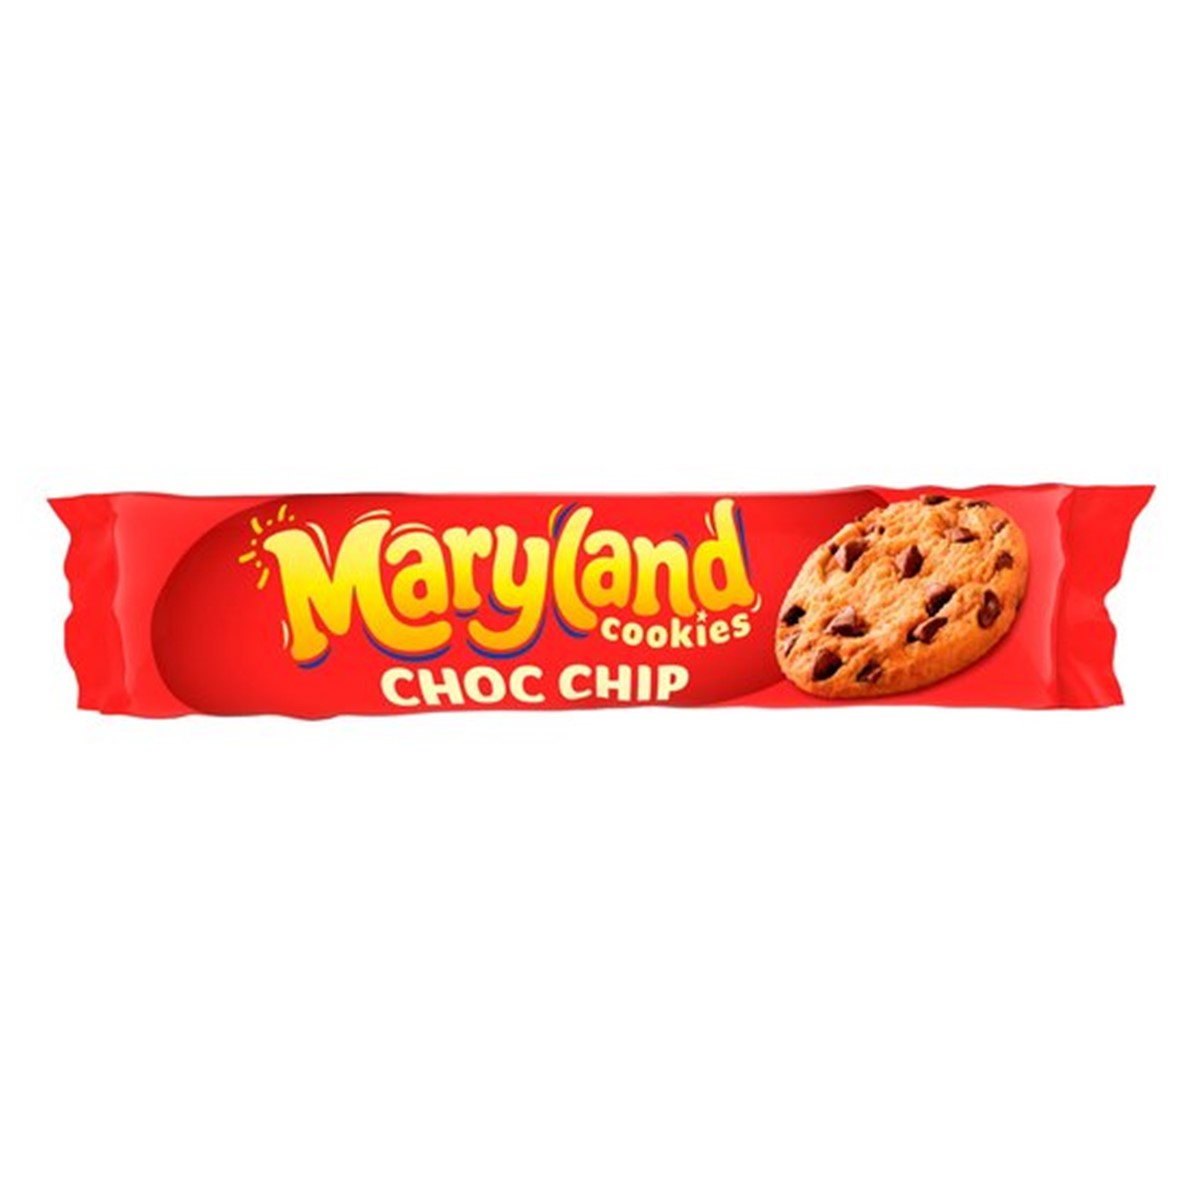 Maryland Choc Chip Cookies - 12x200g packets